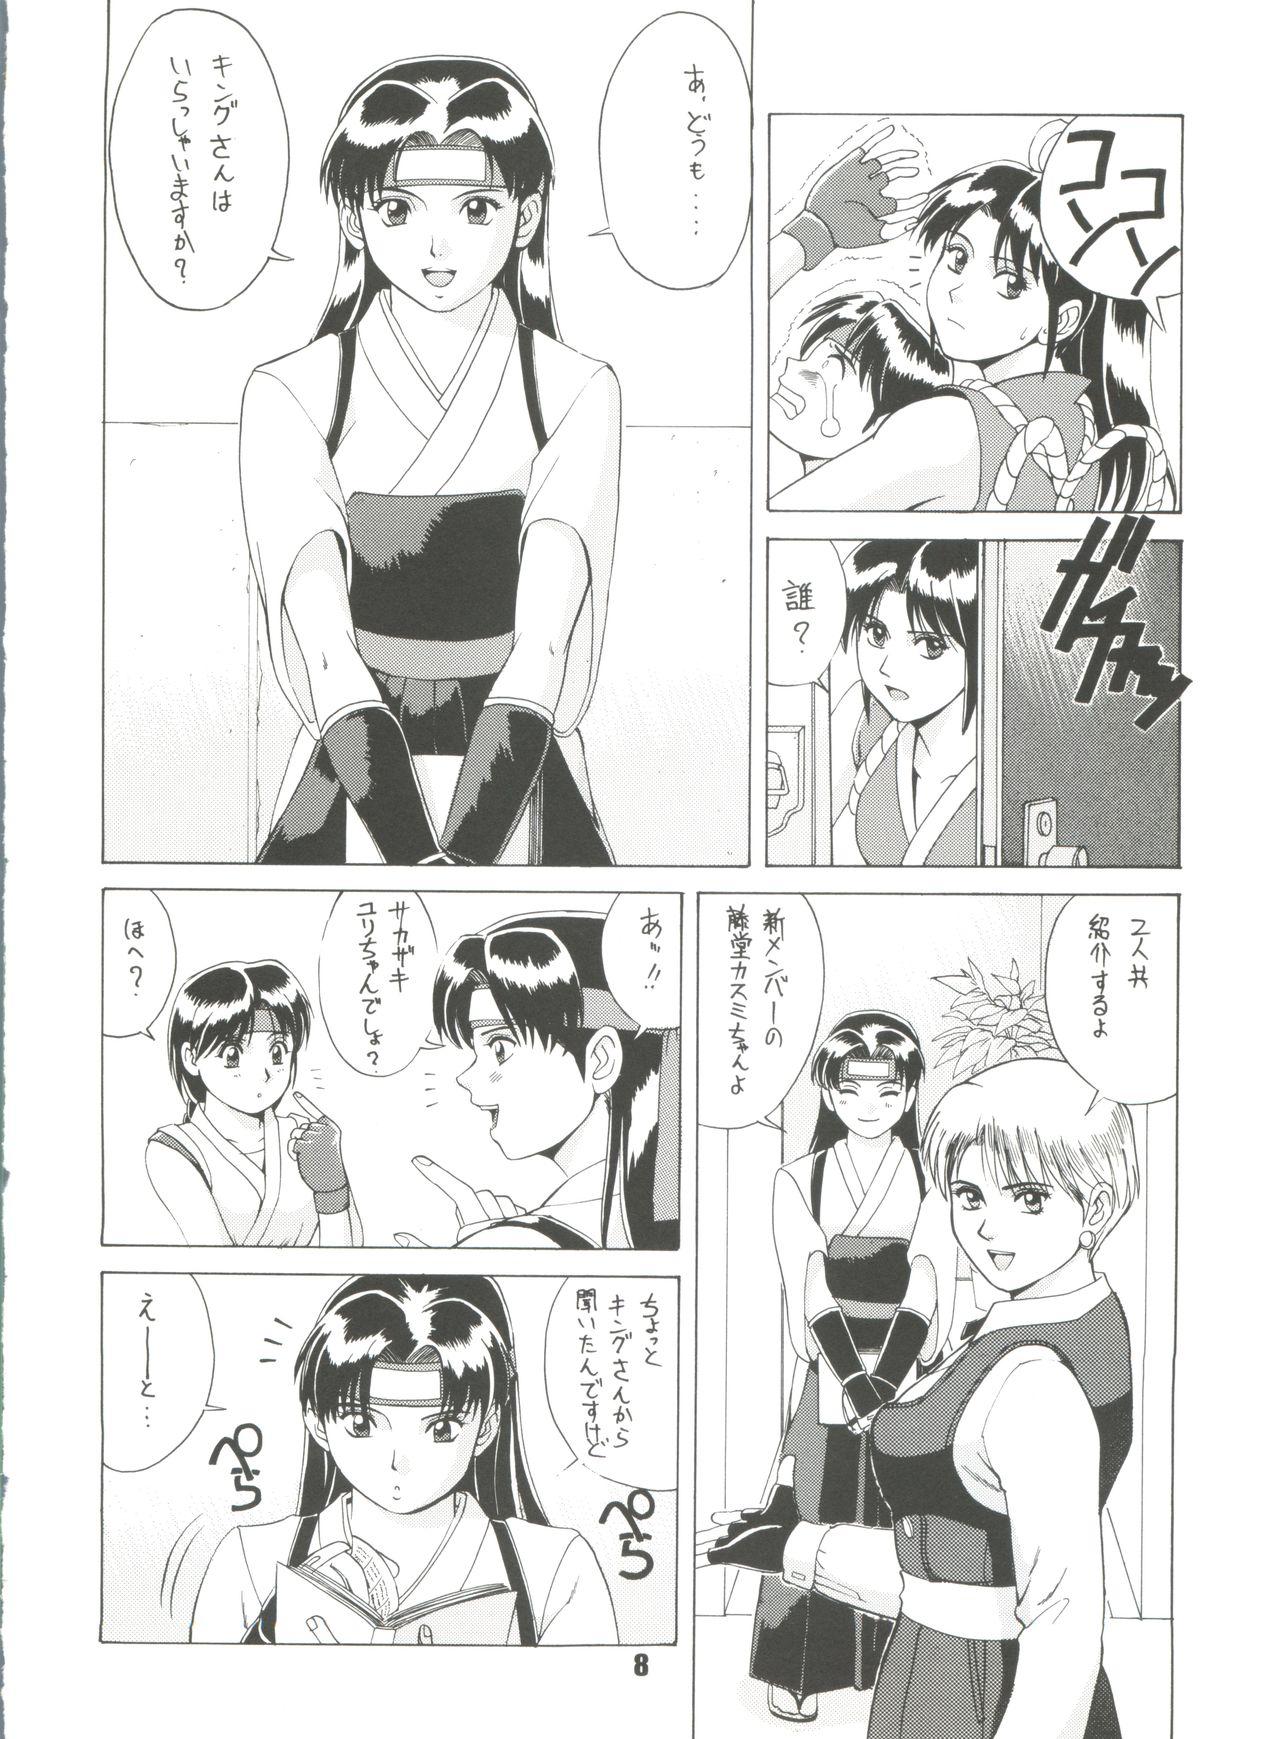 Gayfuck The Yuri & Friends '96 - King of fighters Masterbation - Page 7